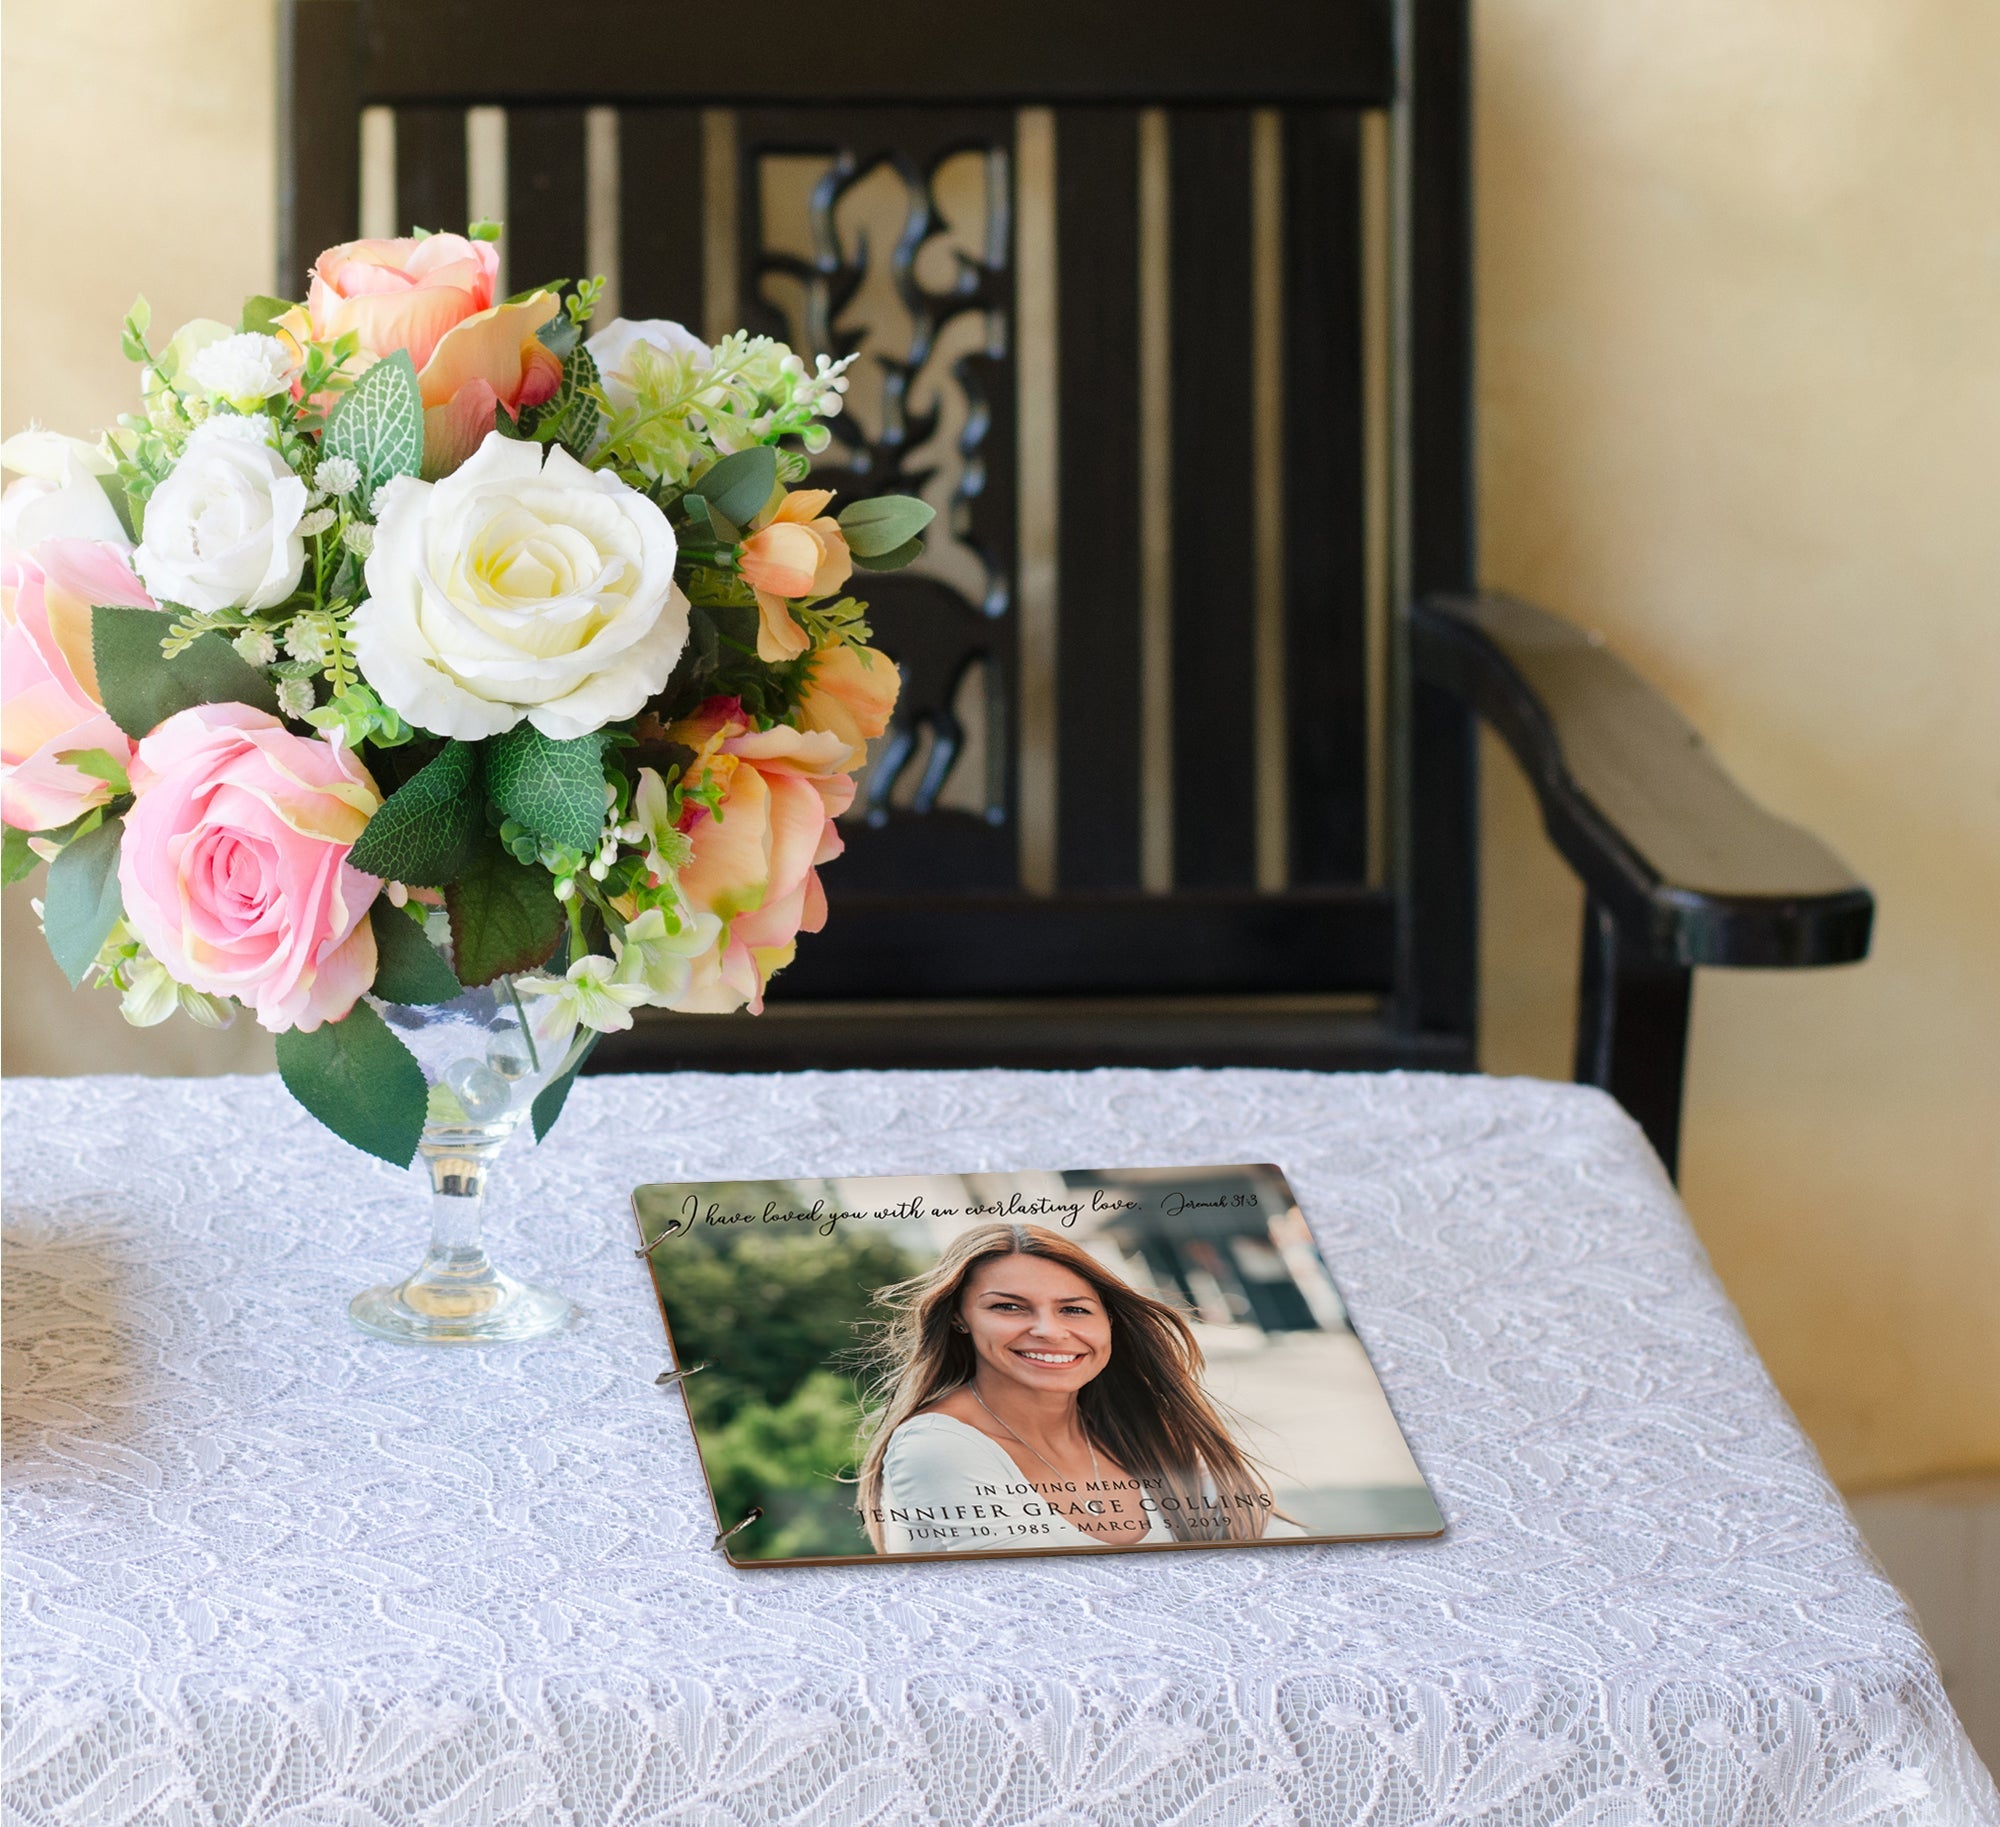 Personalized Funeral Service Guest Book 8.5x11 Everlasting Love (Full color portrait) - LifeSong Milestones